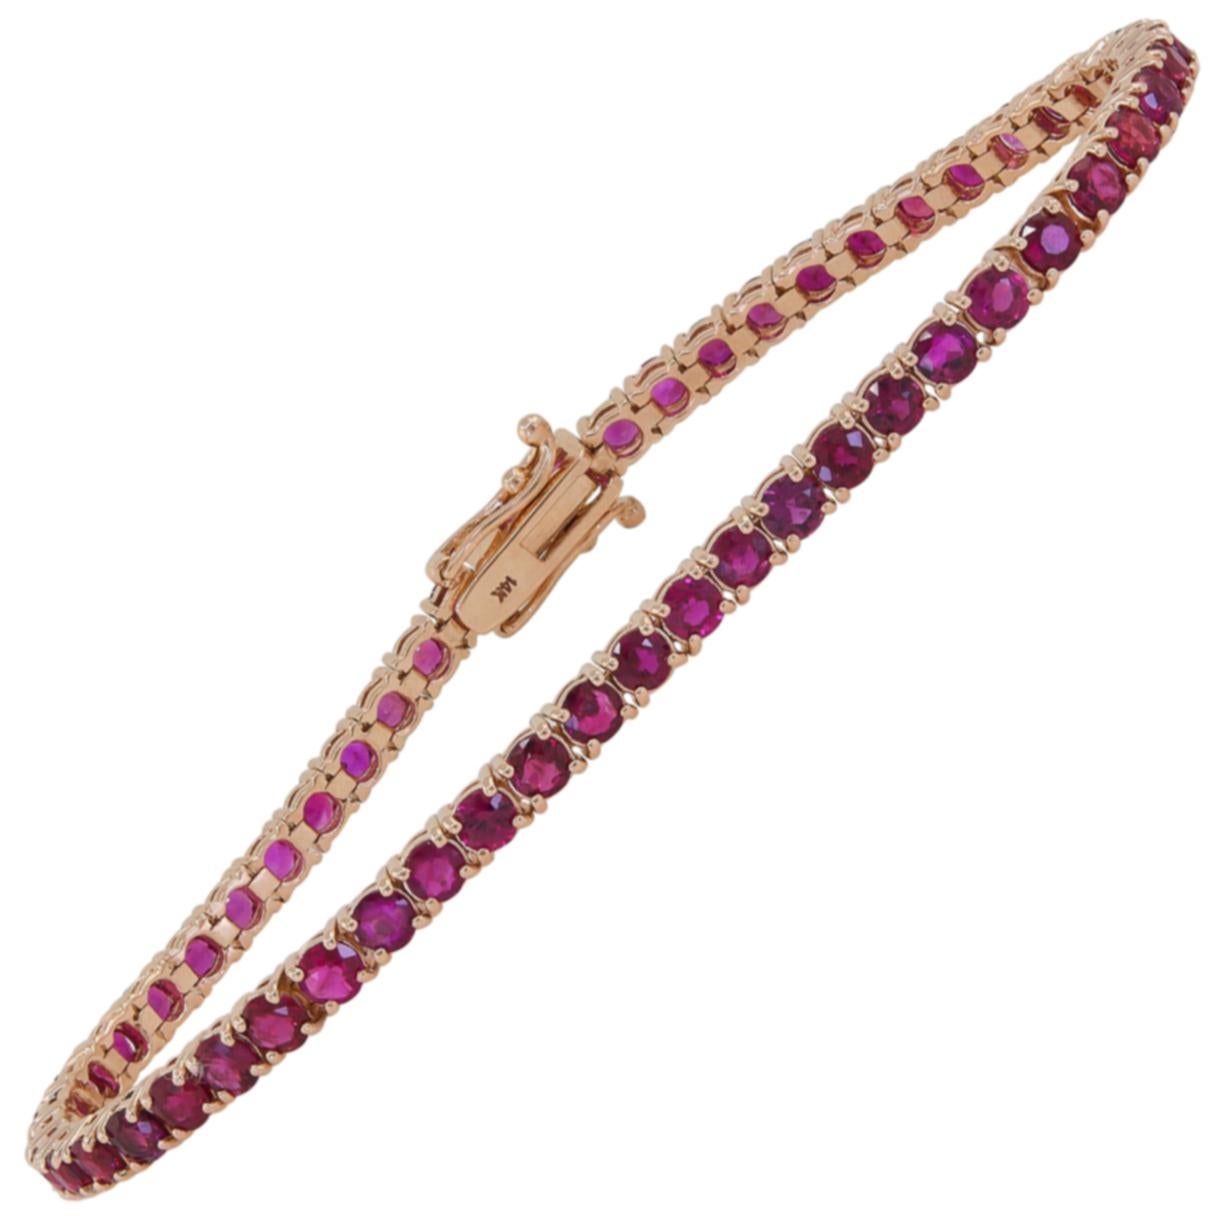 Ruby Tennis Bracelet with 7.19 Carat of Round Natural Rubies